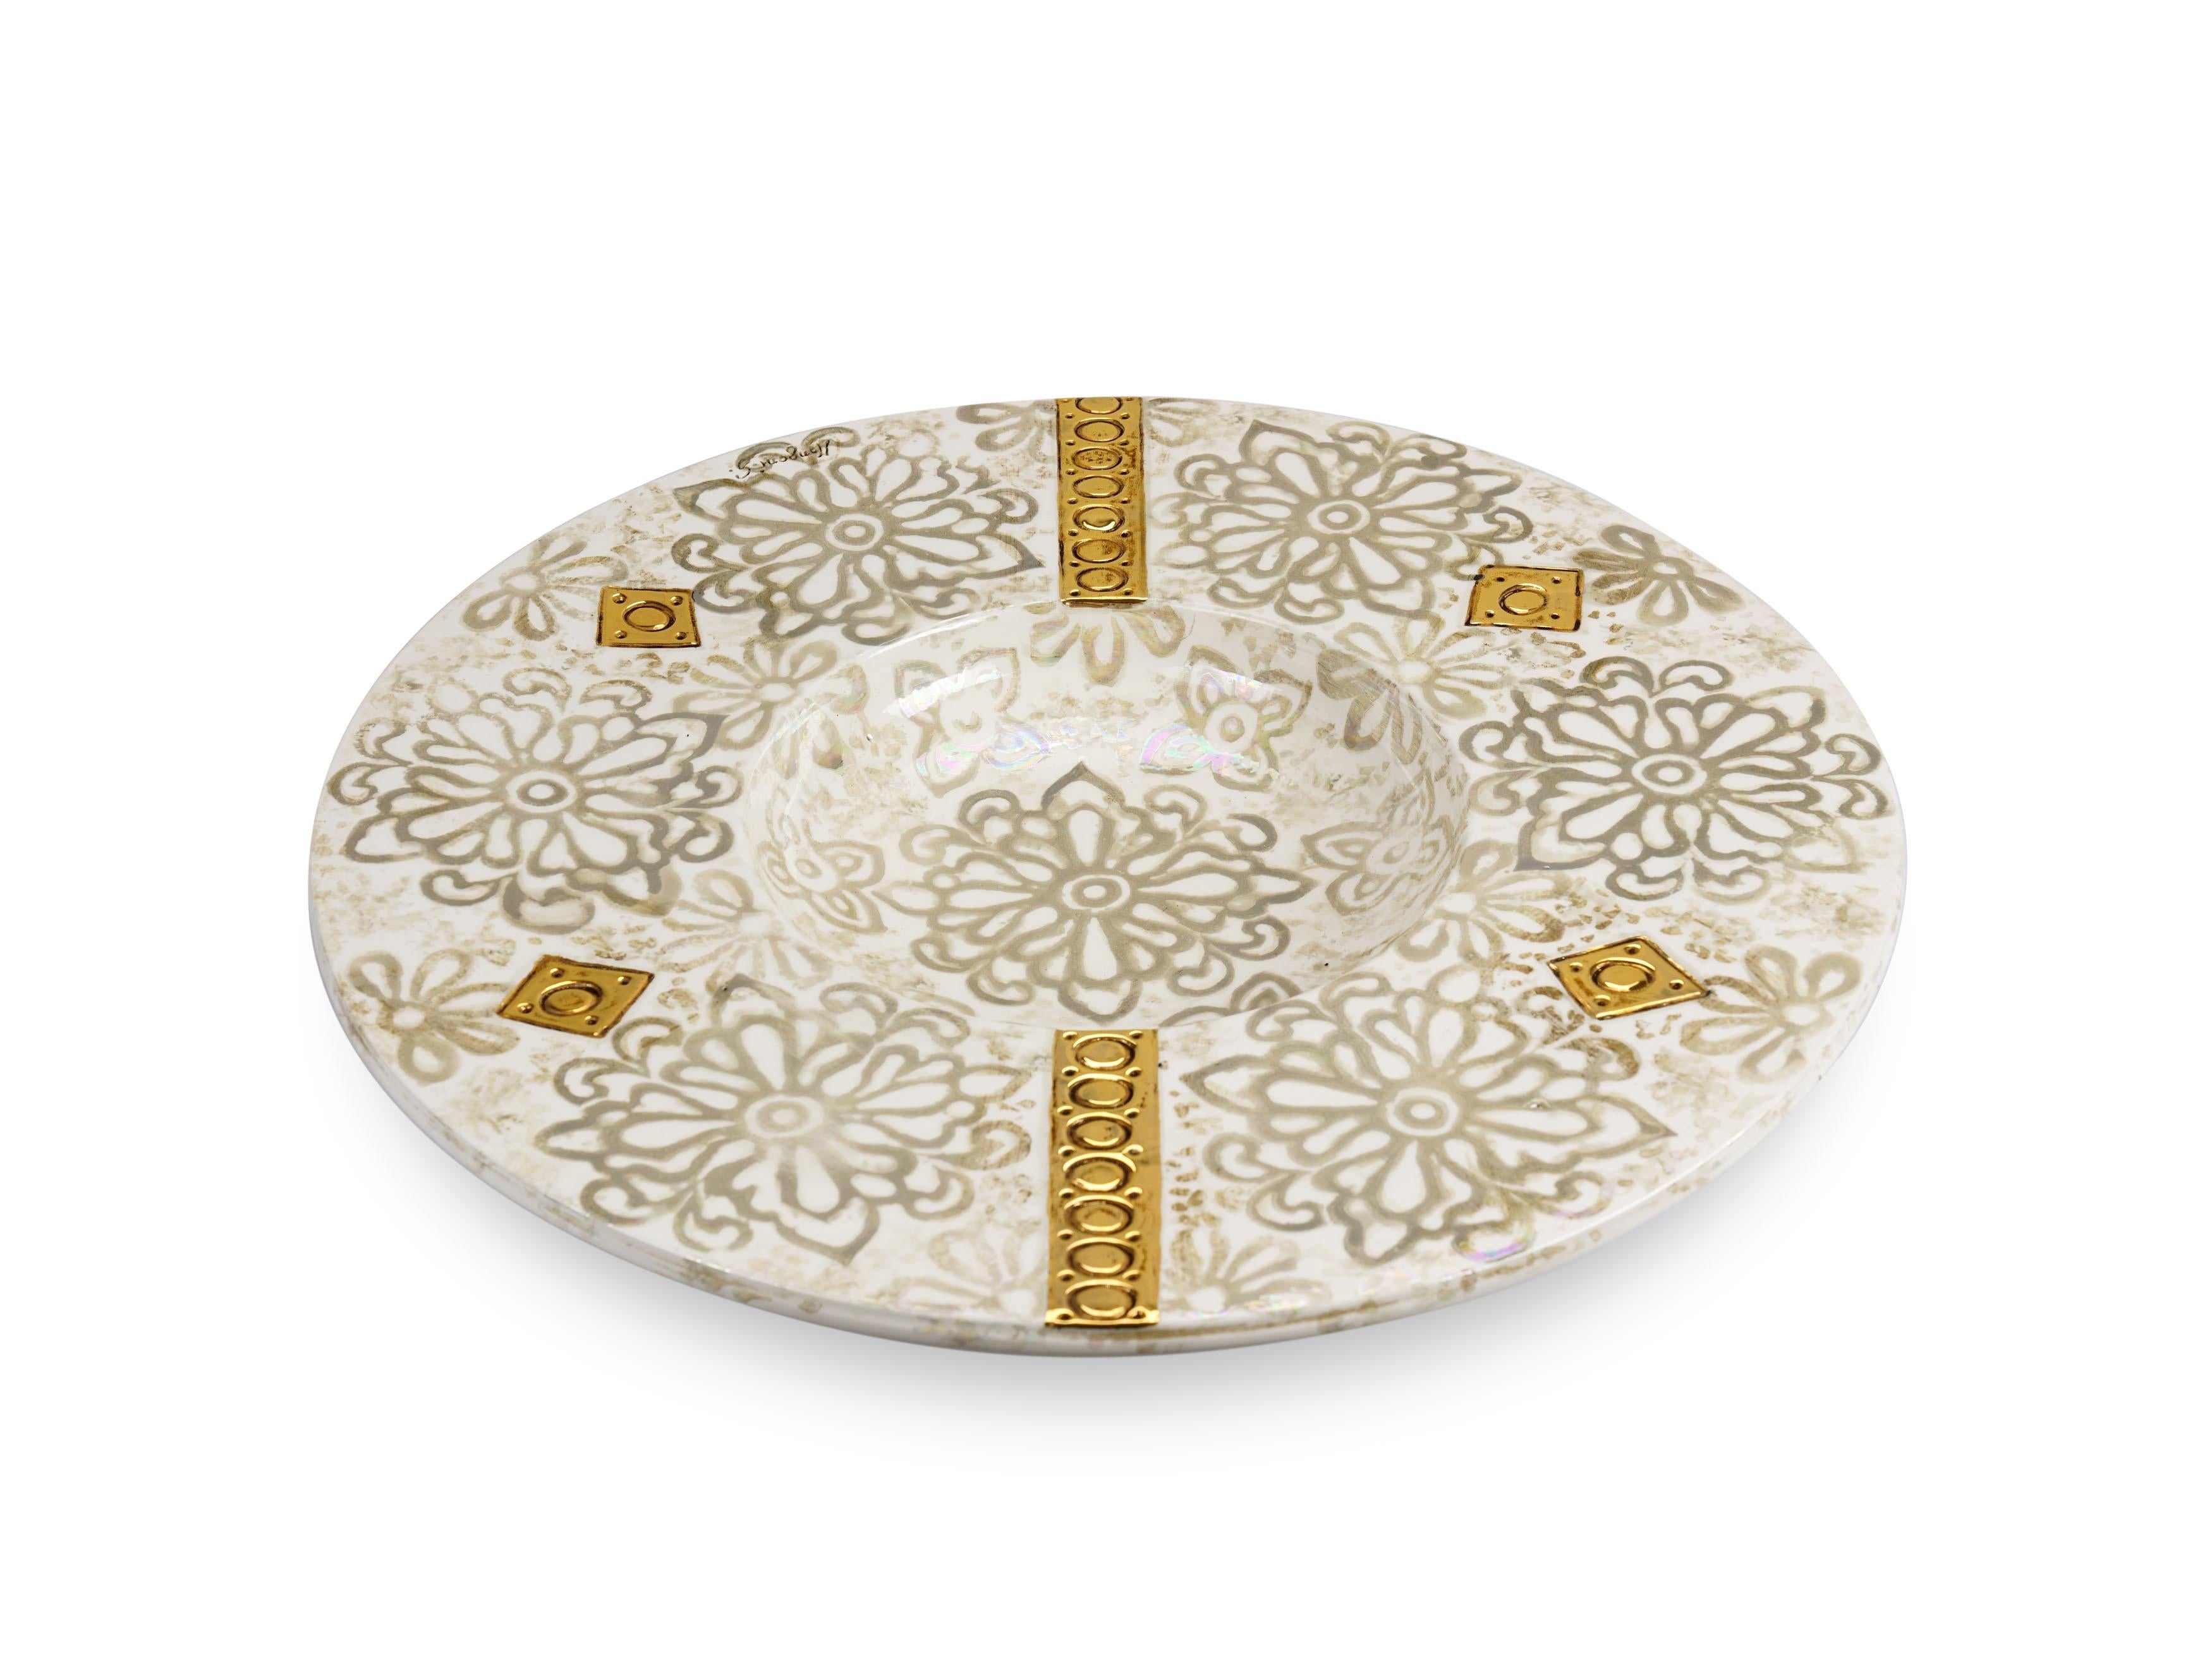 Large decorative ceramic plate made and hand painted by the artist G. Mengoni for deBlona. Diameter 64 cm (25.2 in). The surface of the plate is studded and decorated with ash-coloured floral motifs on an antique white background, the decoration are